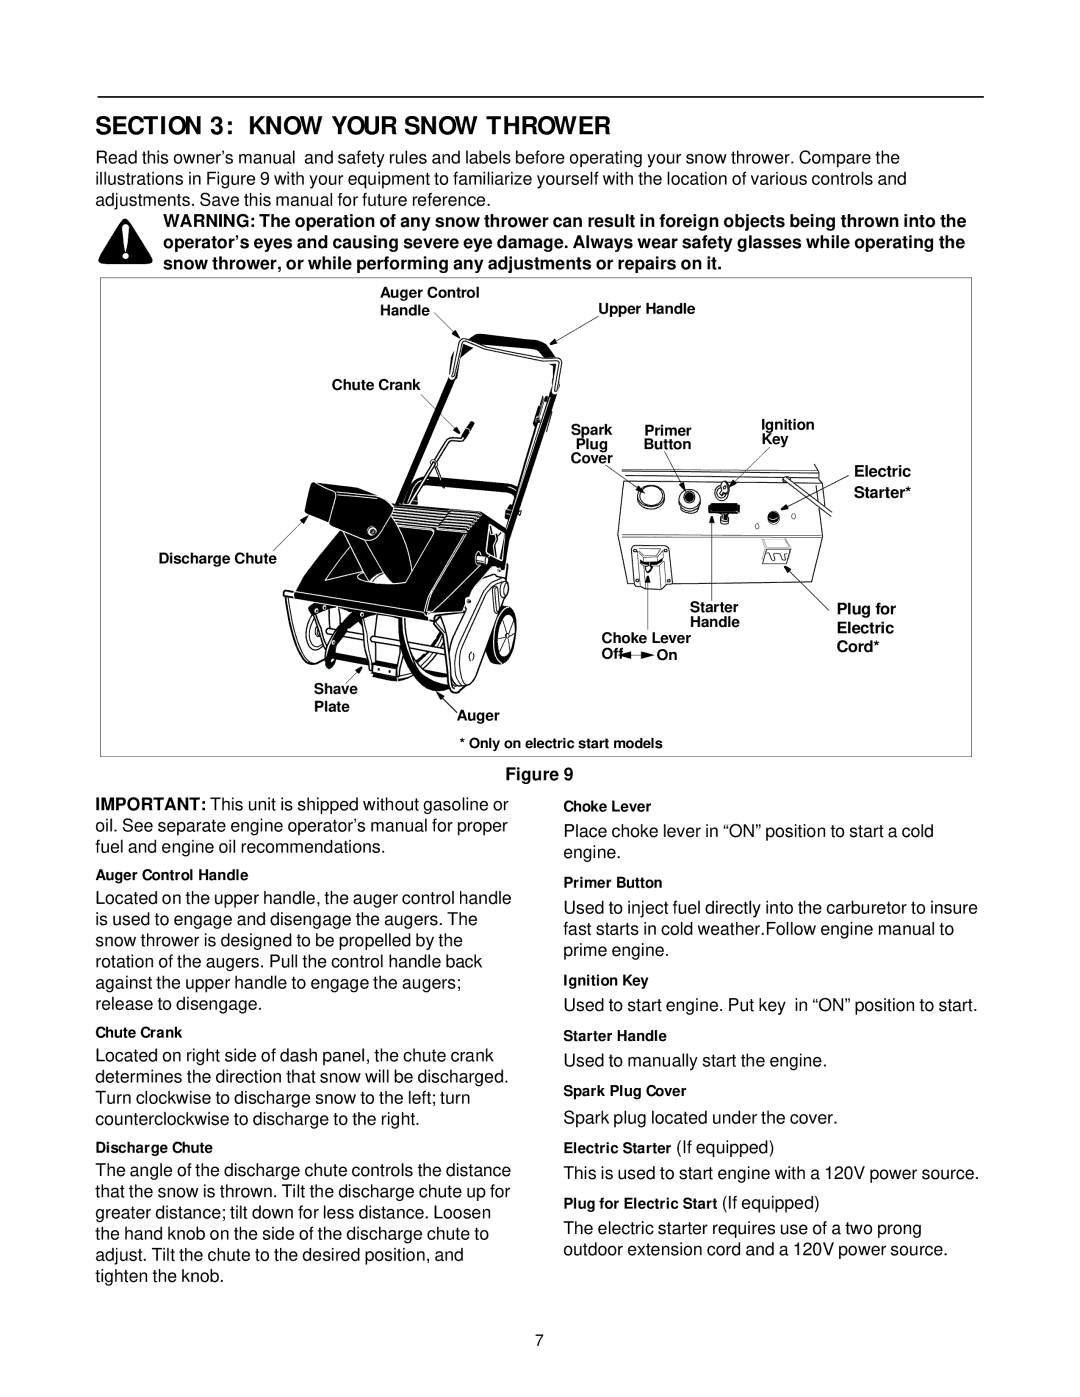 White Outdoor SB 45 manual Know Your Snow Thrower, Auger Control Handle 